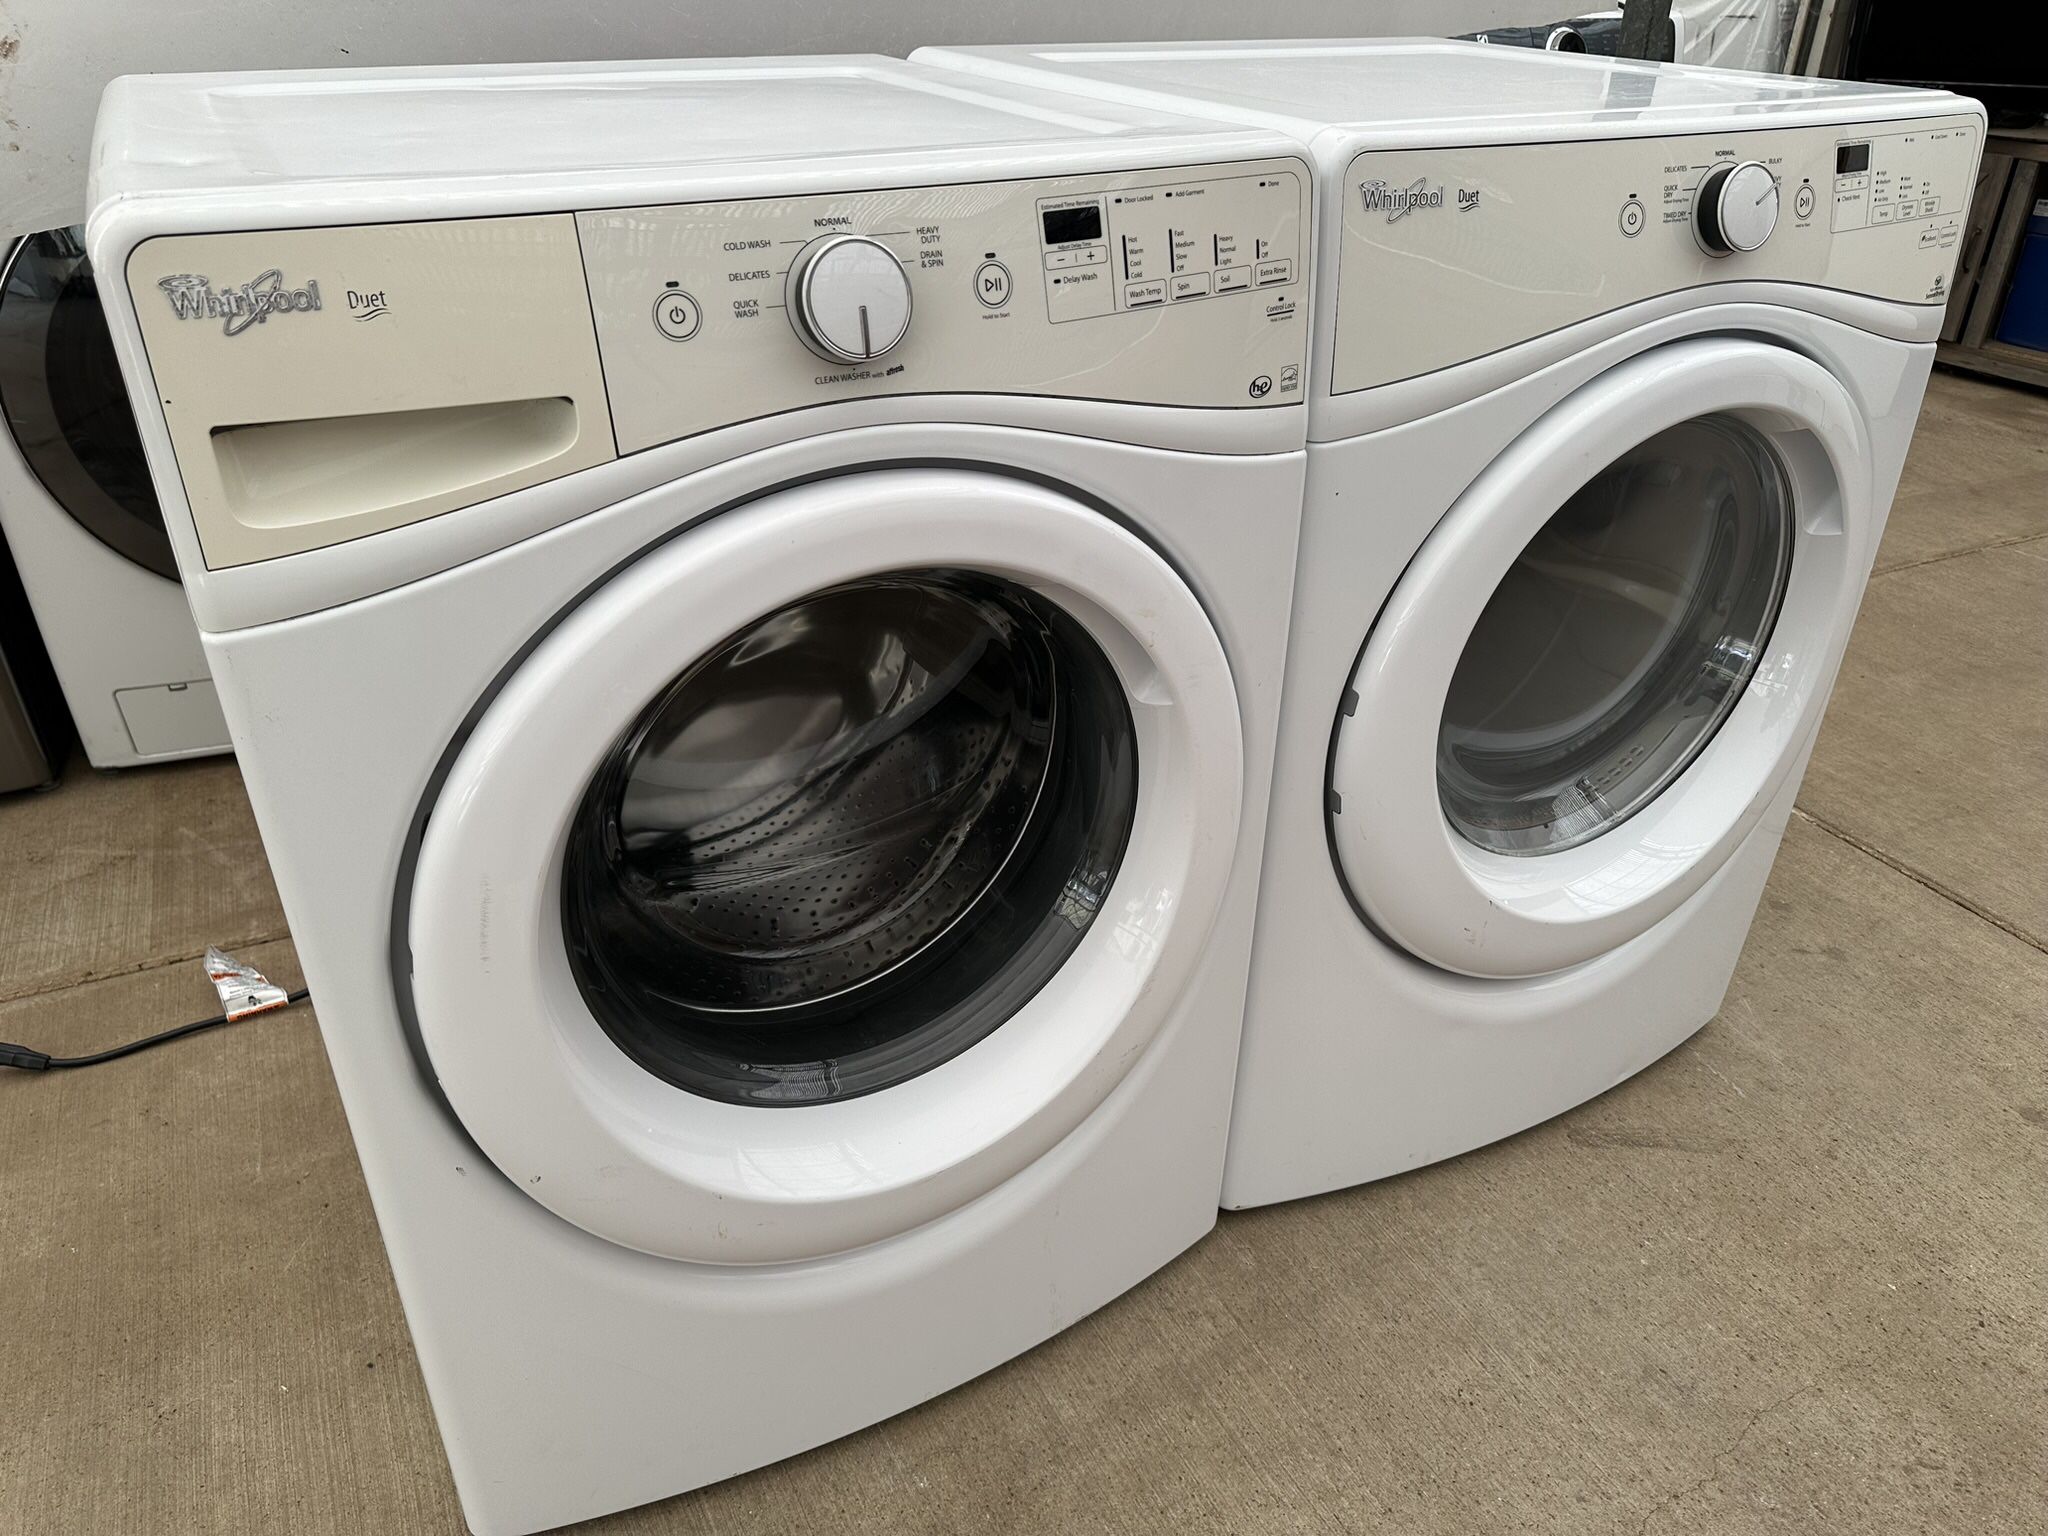 Whirlpool Washer And Electric Dryer Laundry Set 